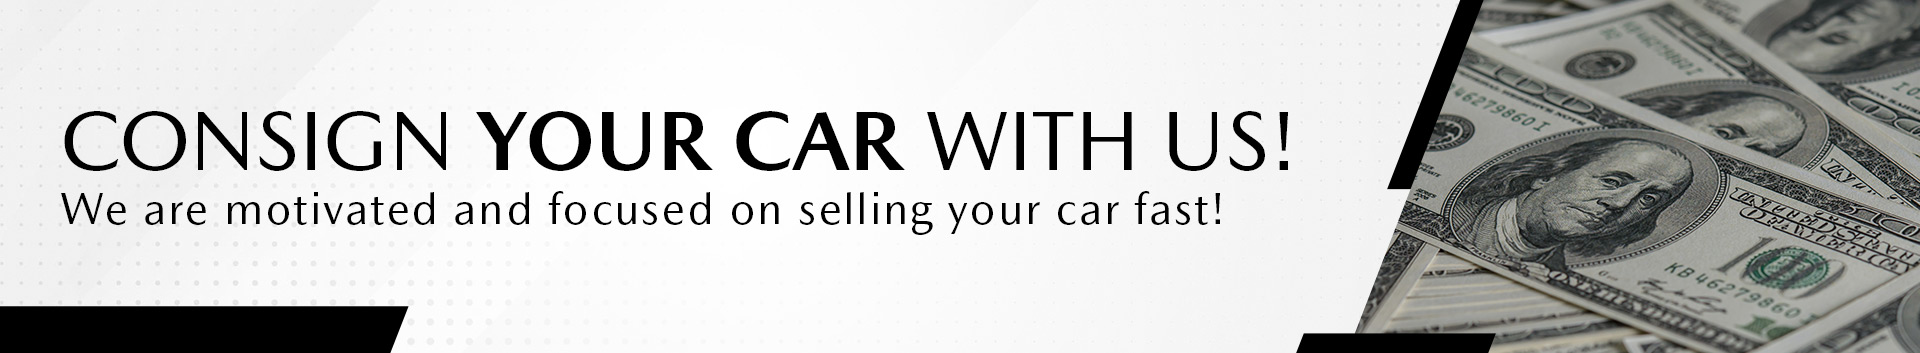 Consign Your Car With Us